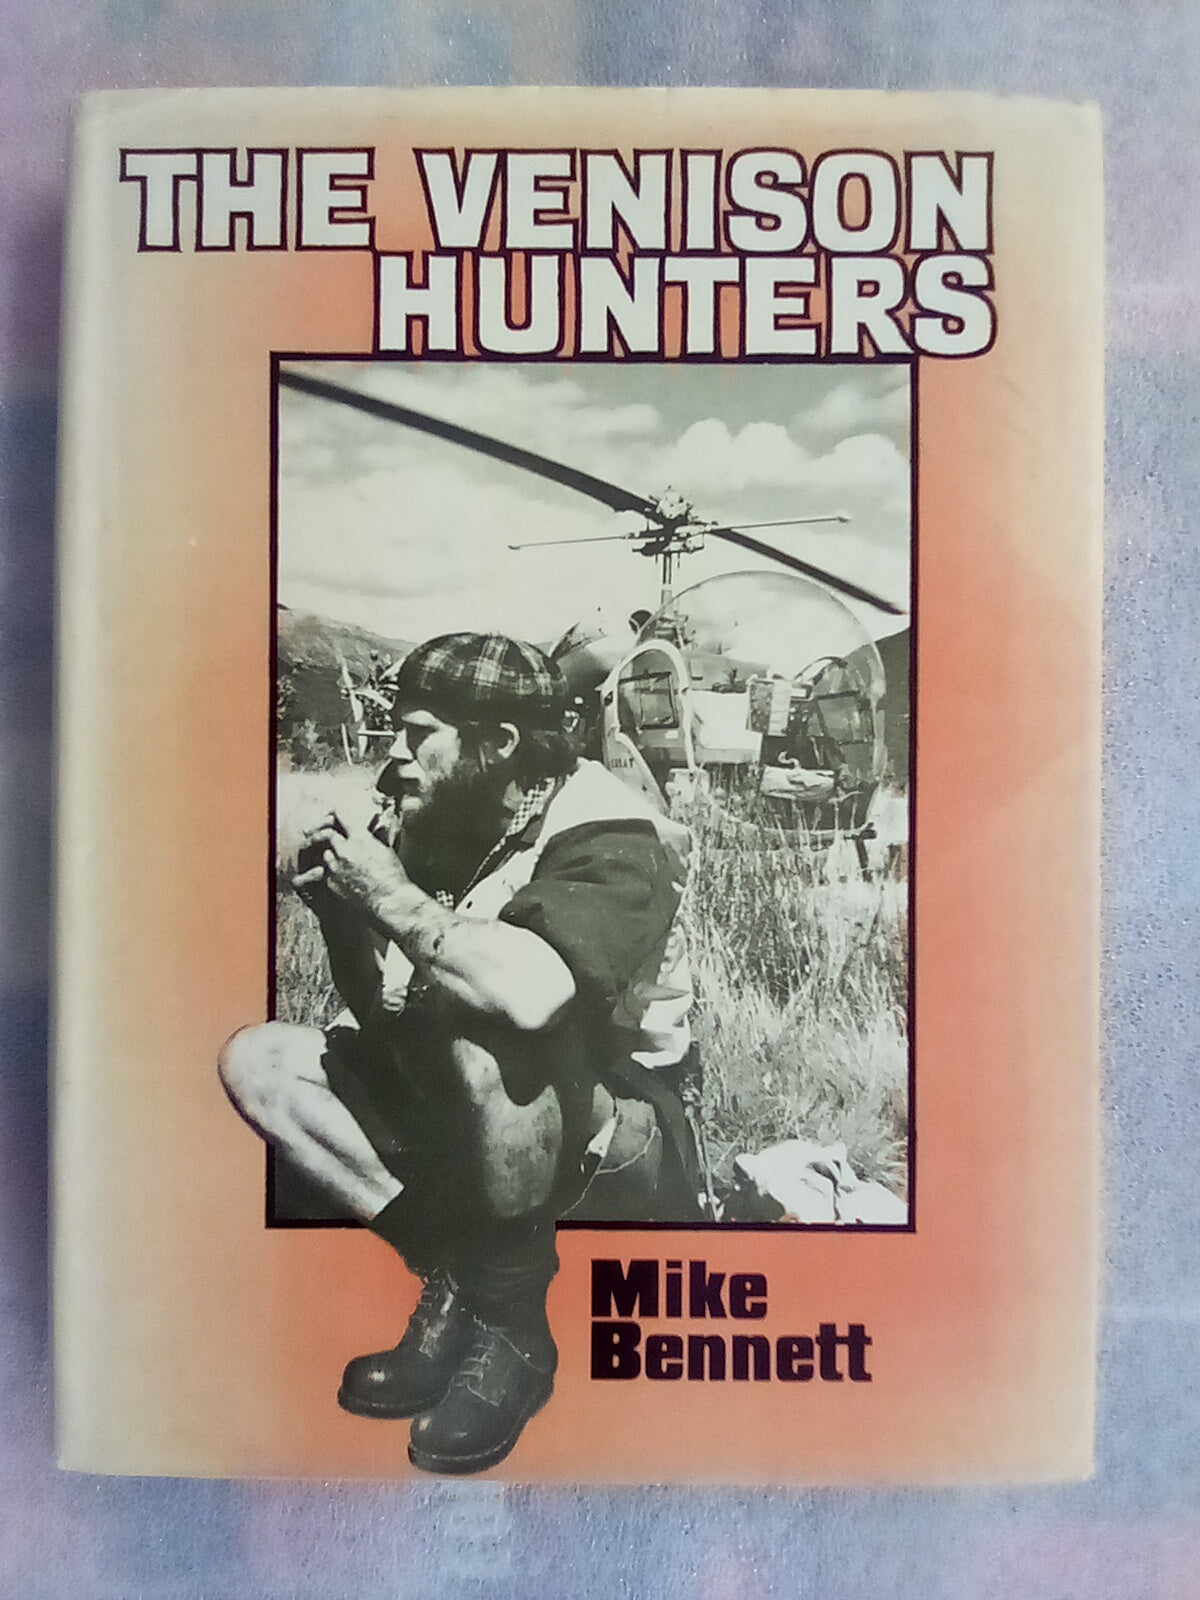 The Venison Hunters (1979) by Mike Bennett